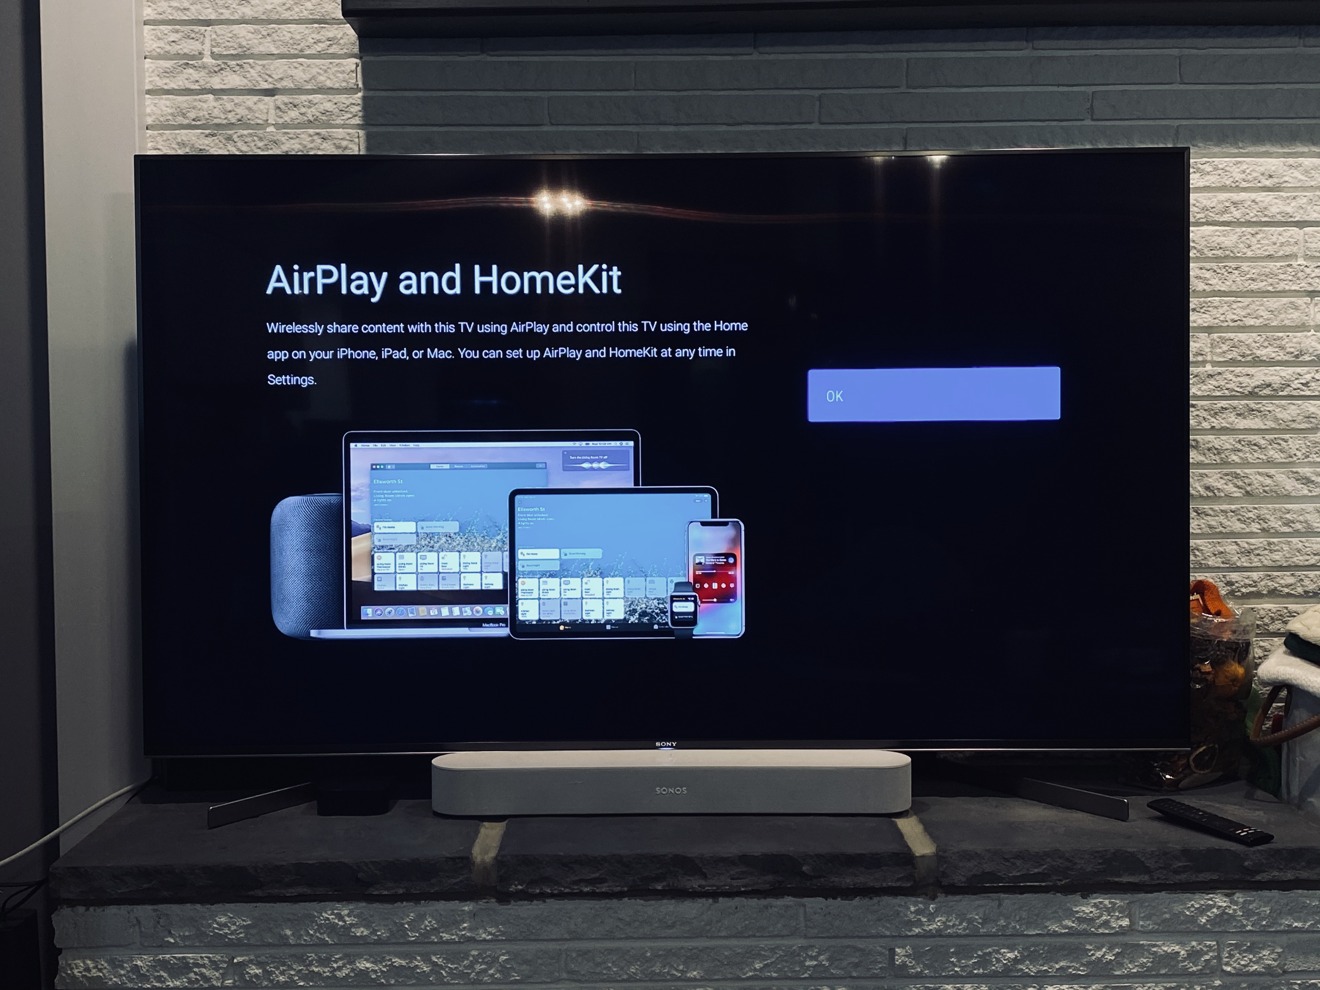 How to Set up HomeKit & AirPlay on Your TV? 1